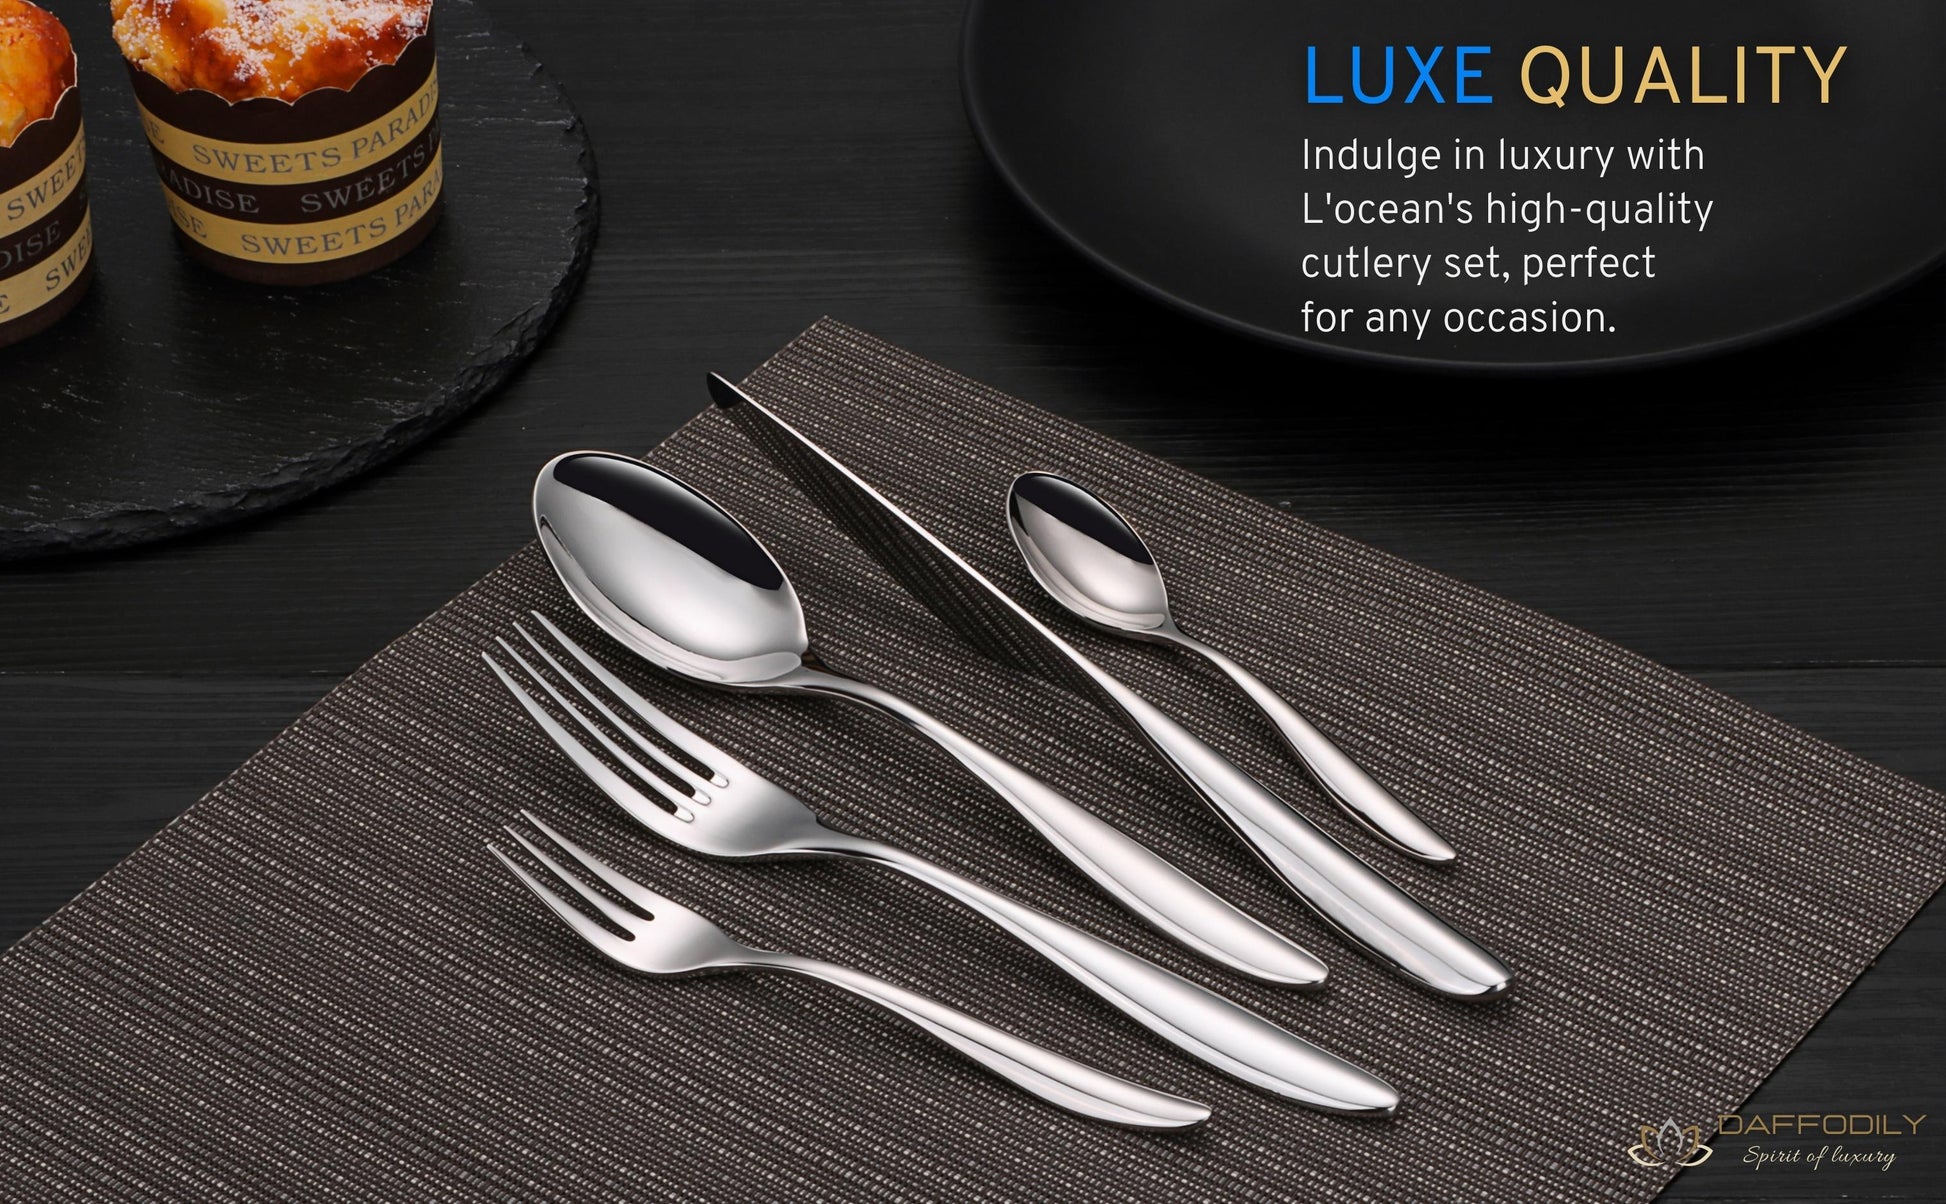 Modern and sleek stainless steel cutlery for everyday use